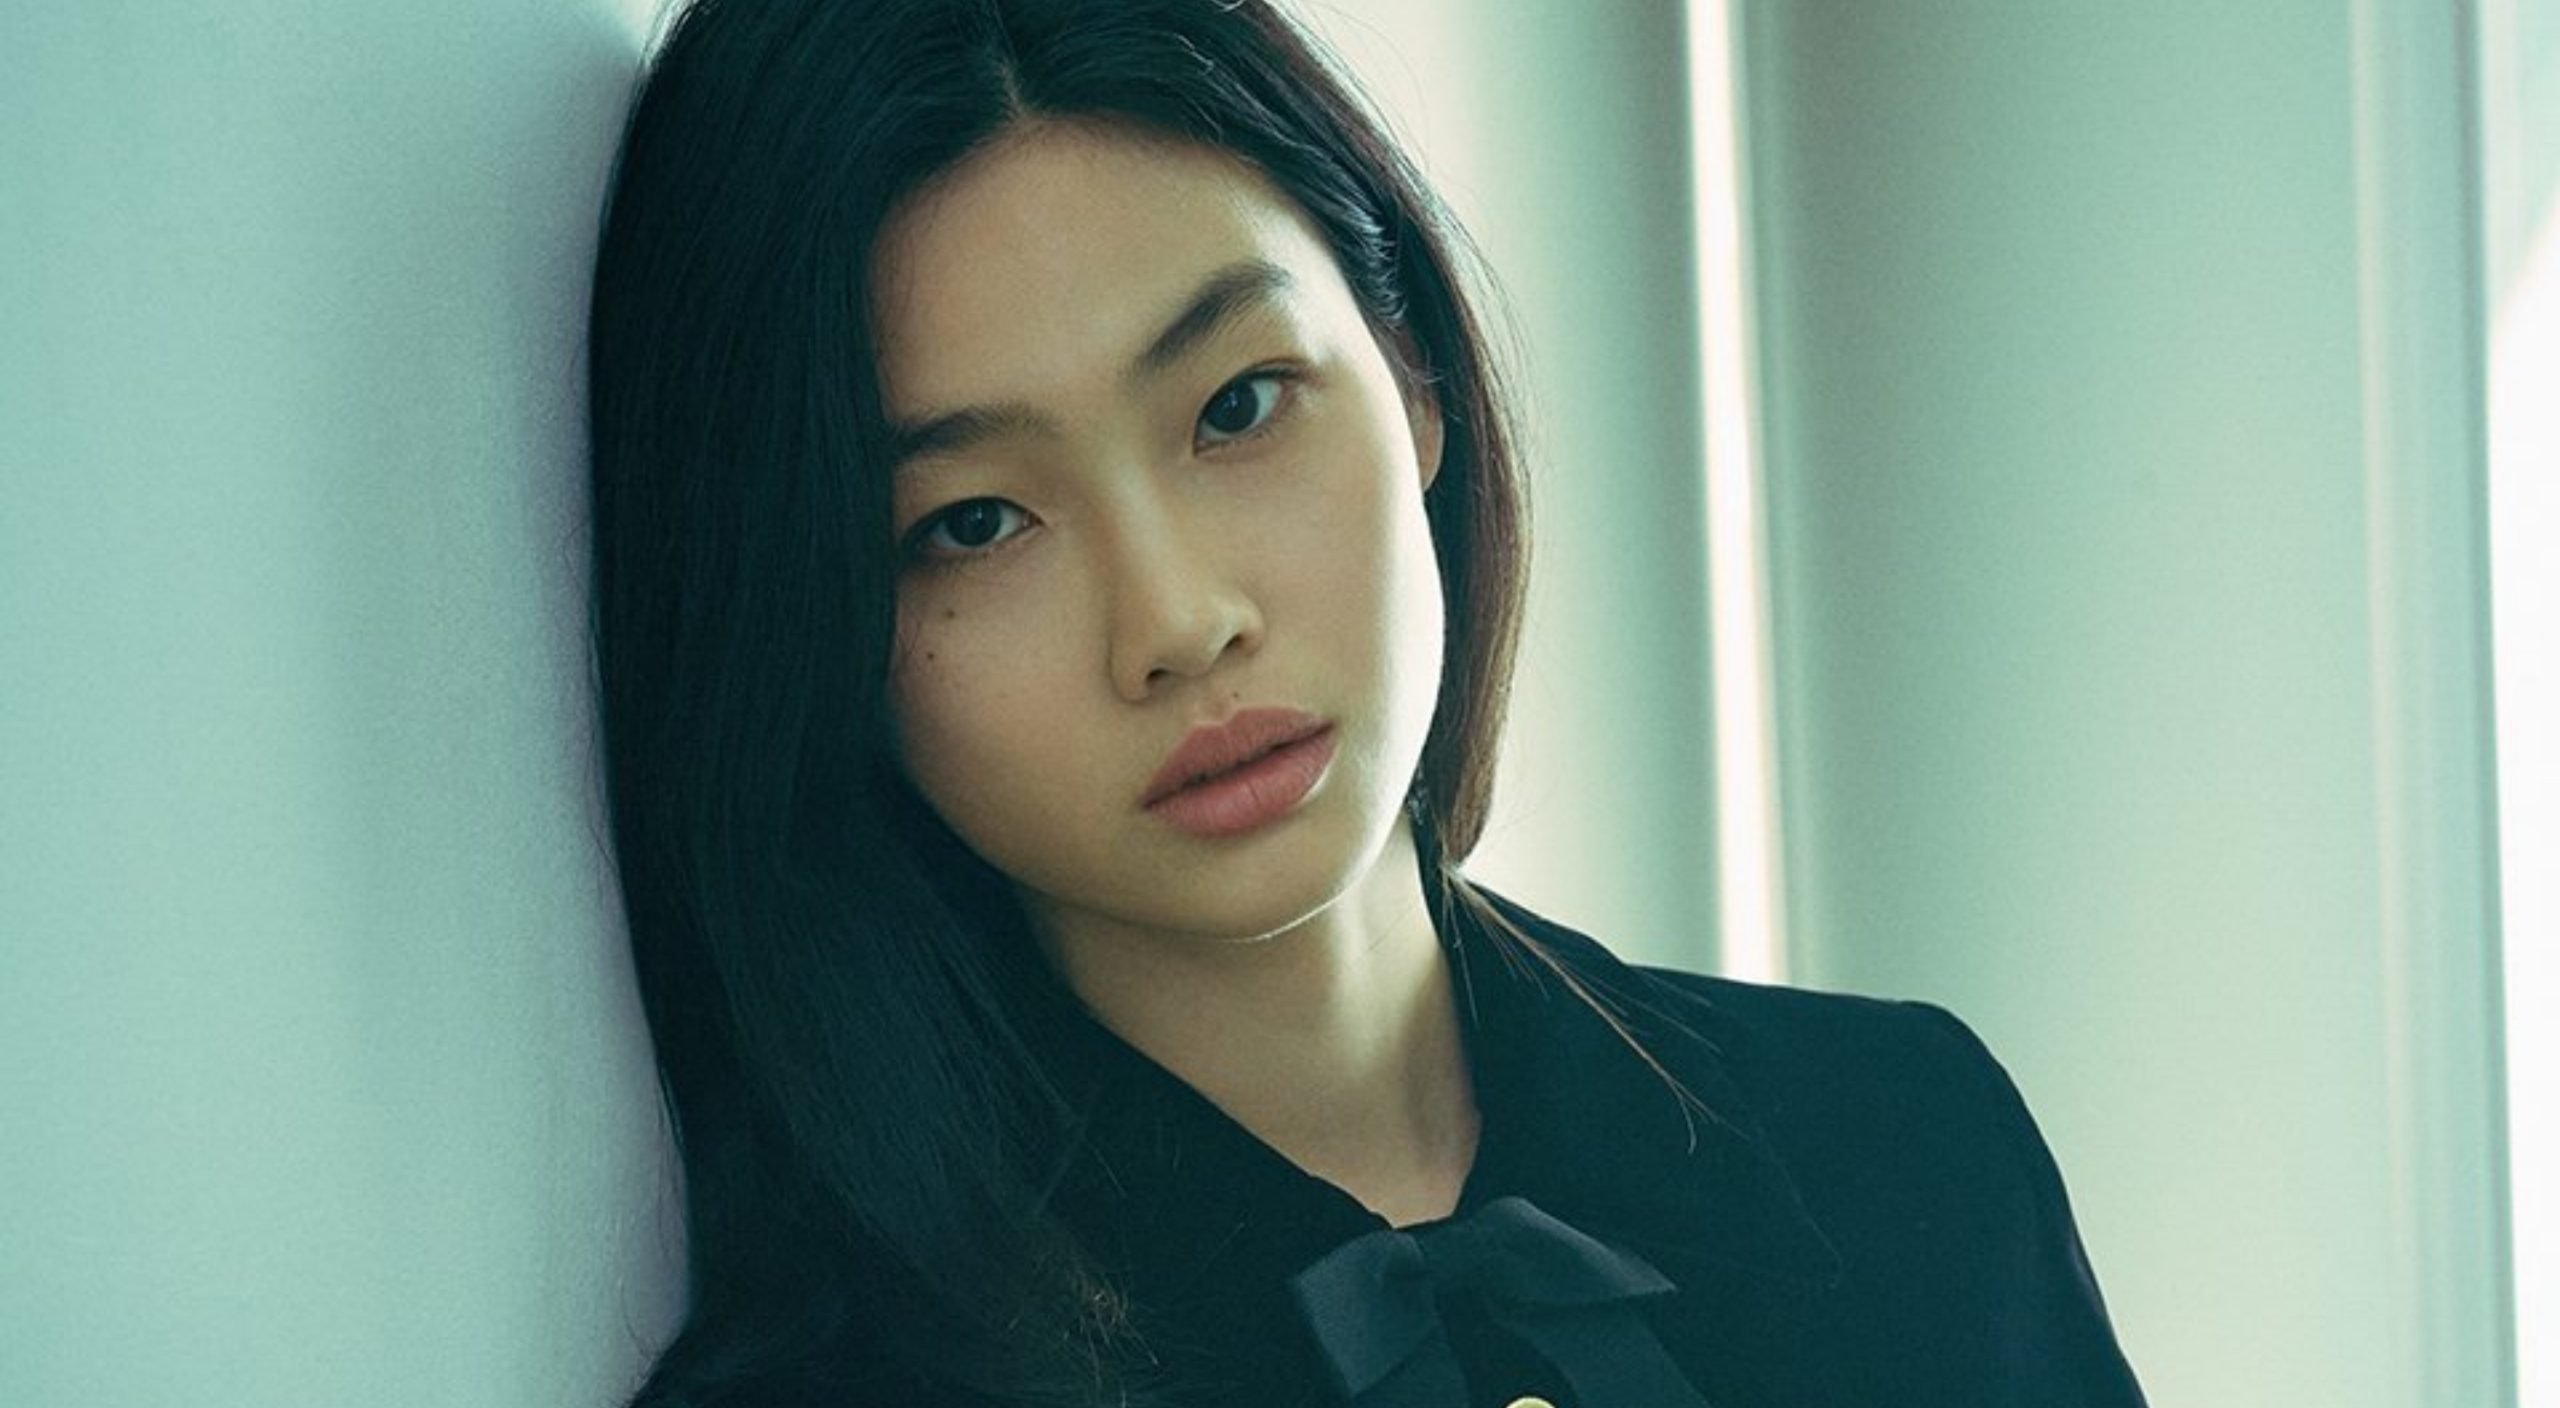 Squid Game''s Jung Ho-yeon to star in new thriller film 'Hope